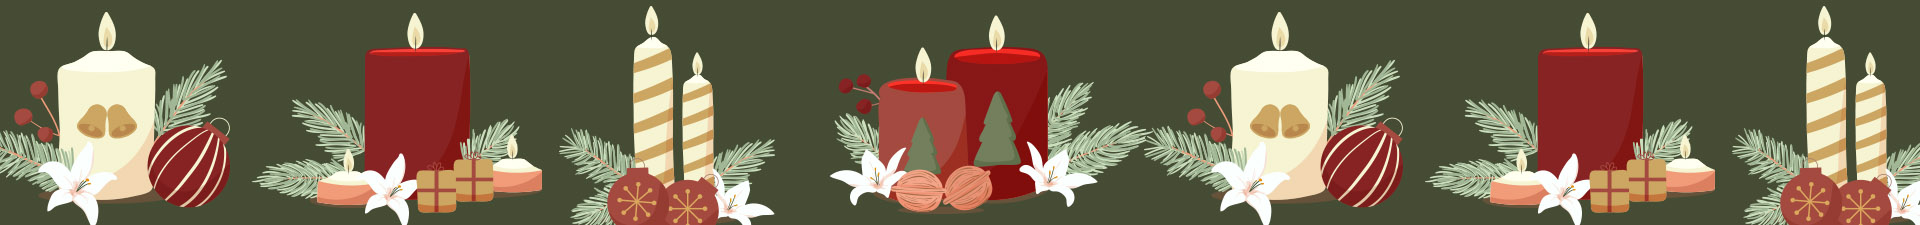 wholesale Christmas candles